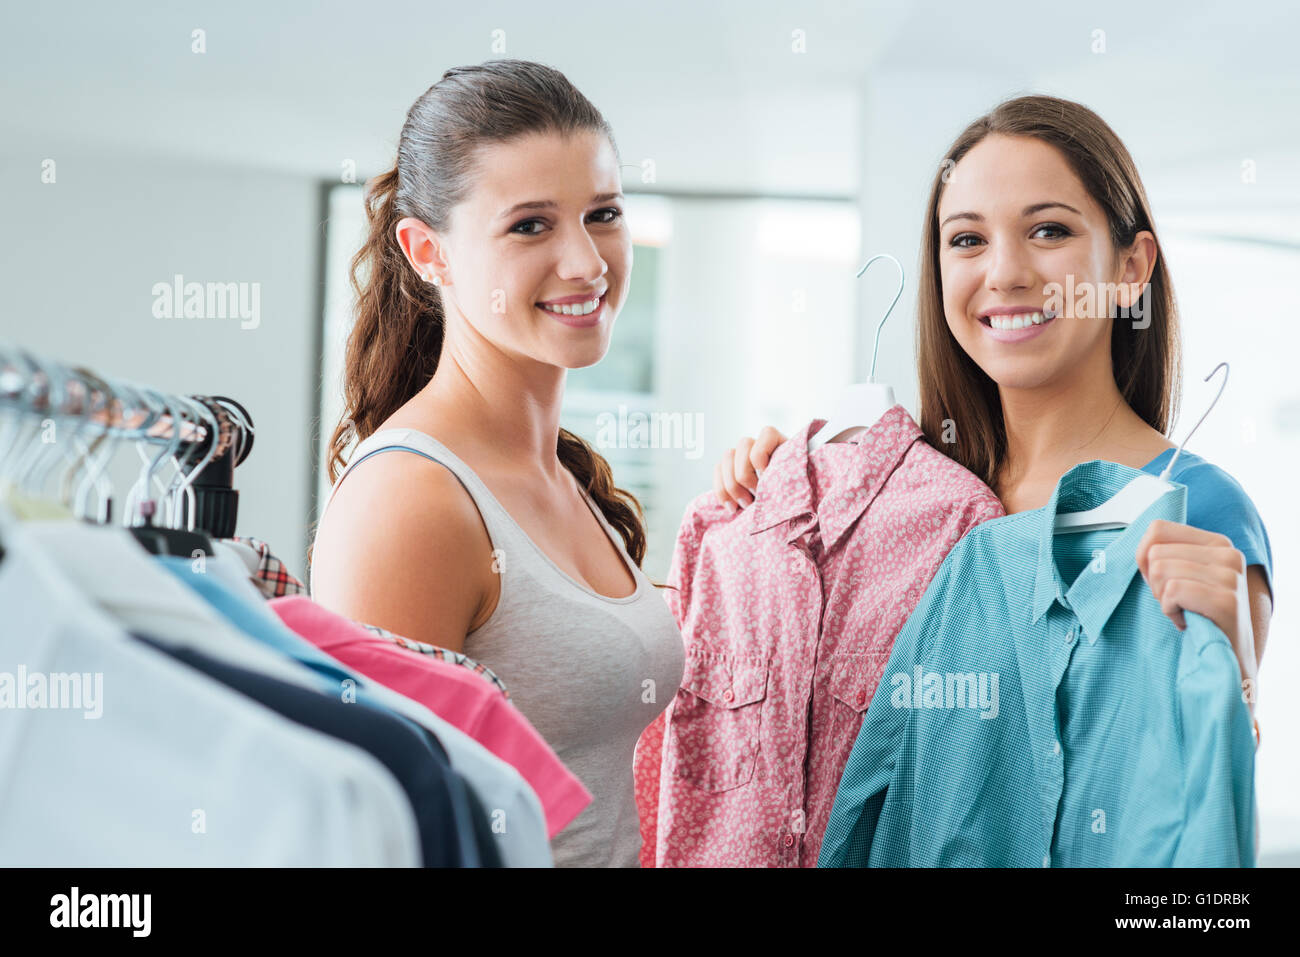 Teenagers shopping women's clothing at the store and smiling at camera, customer satisfaction and quality concept Stock Photo